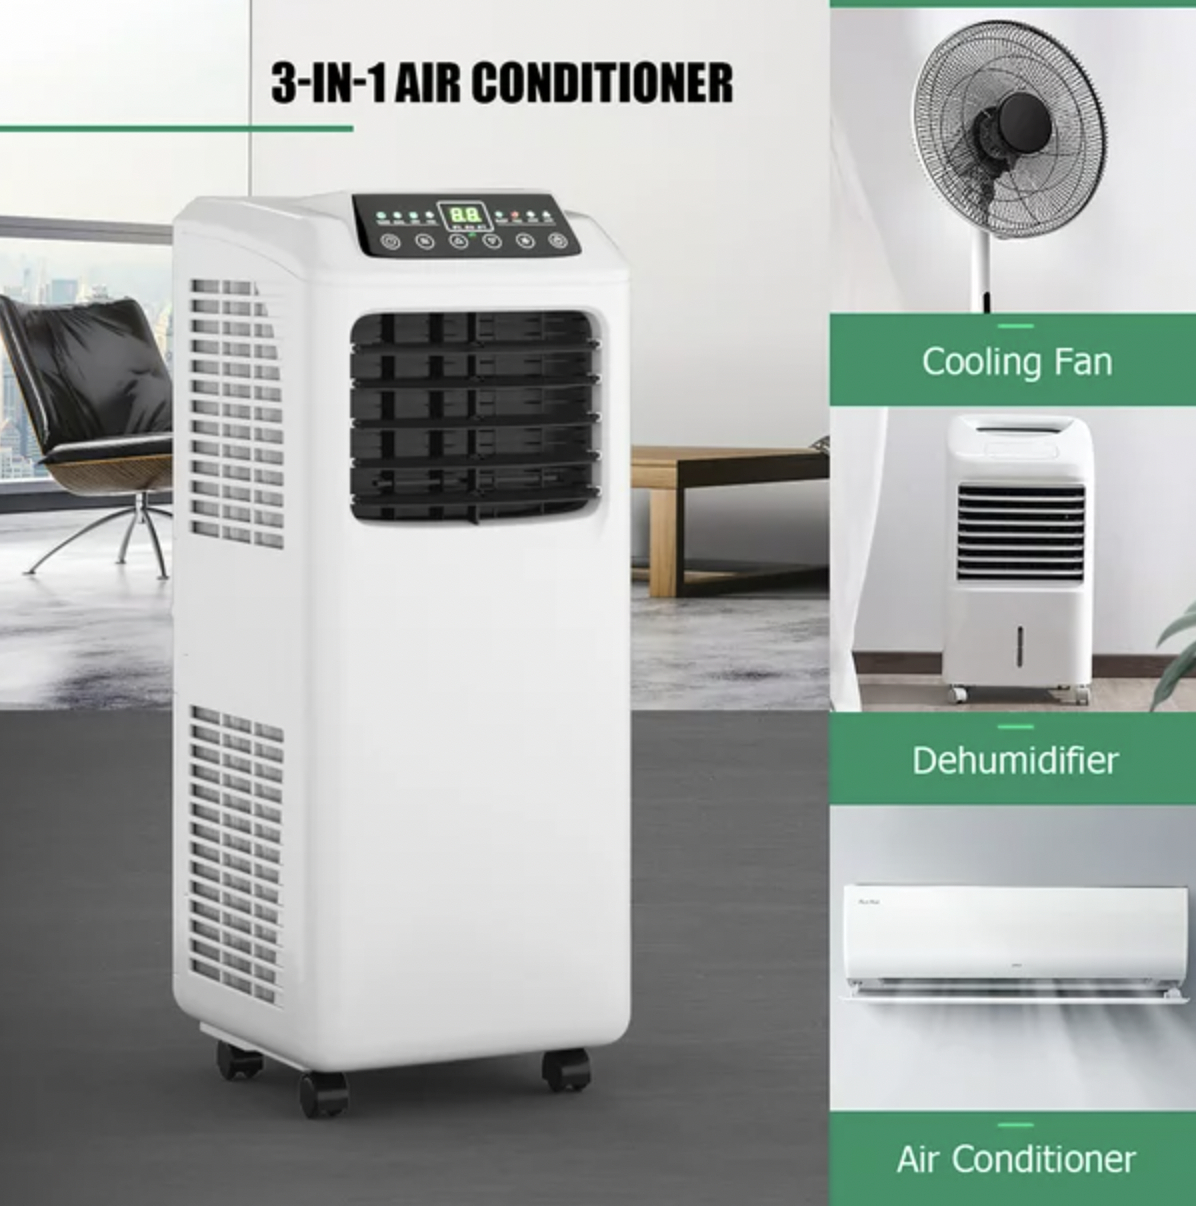 the 3-in-1 air conditioner with functions as cooling fan, dehumidifier, and air conditioner